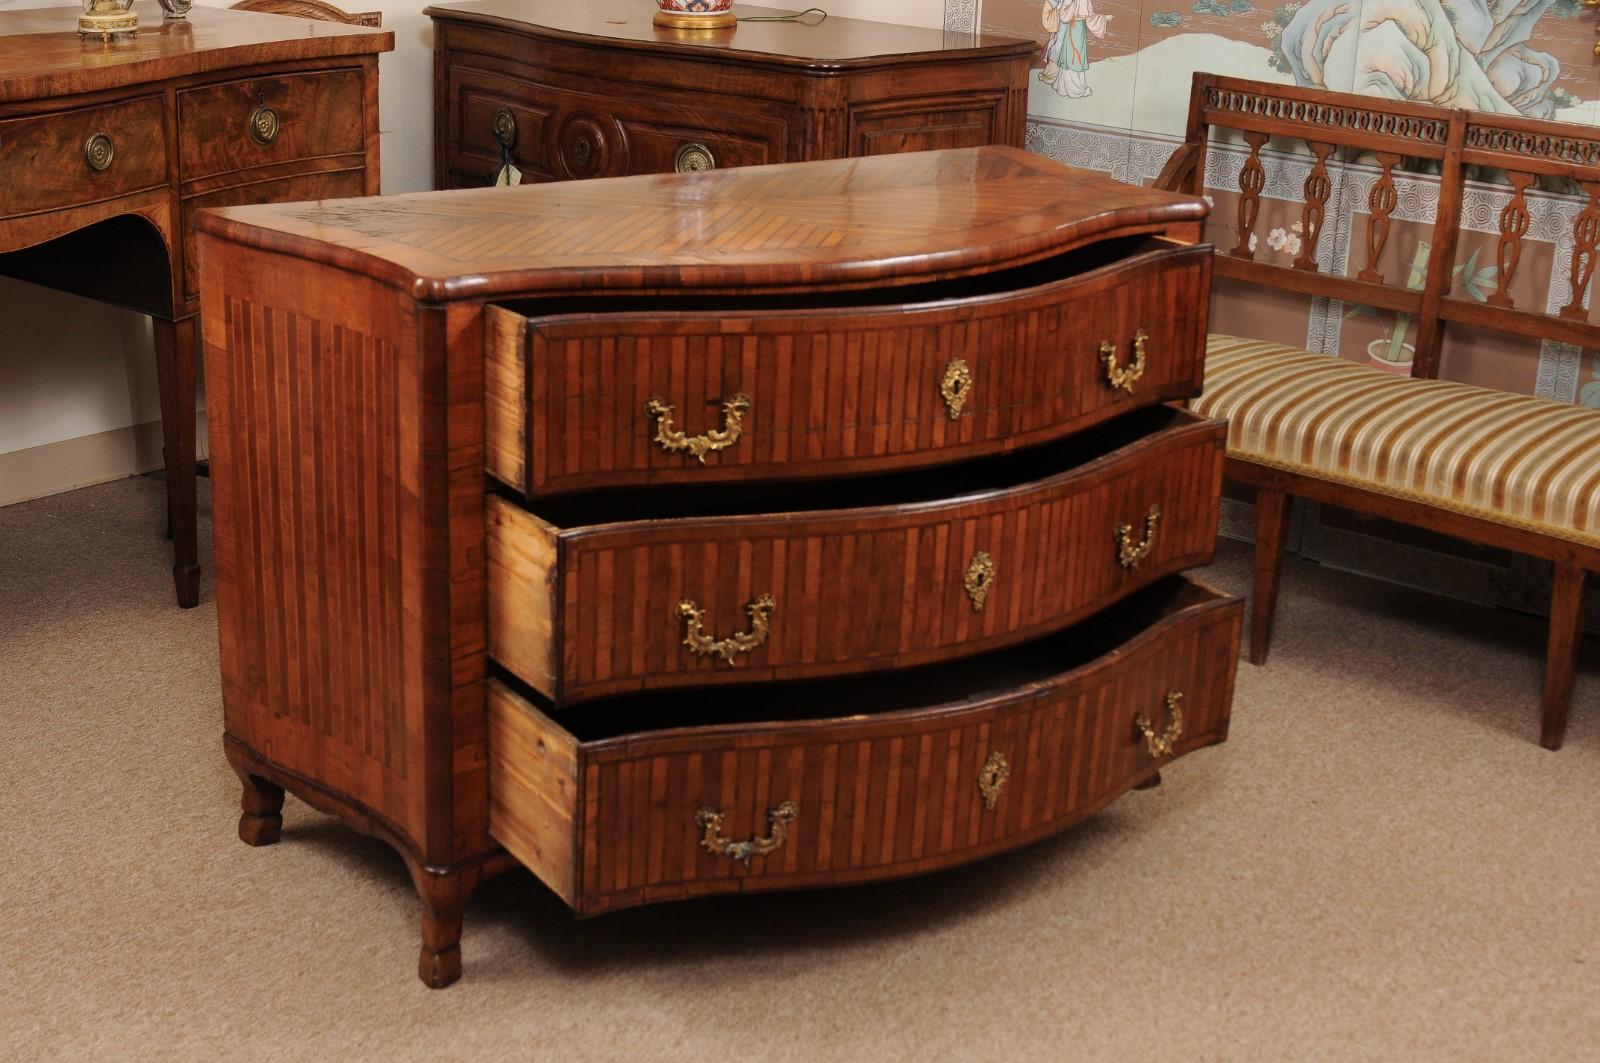  18th Century Continental Parquetry Inlaid Commode with Serpentine Front For Sale 3